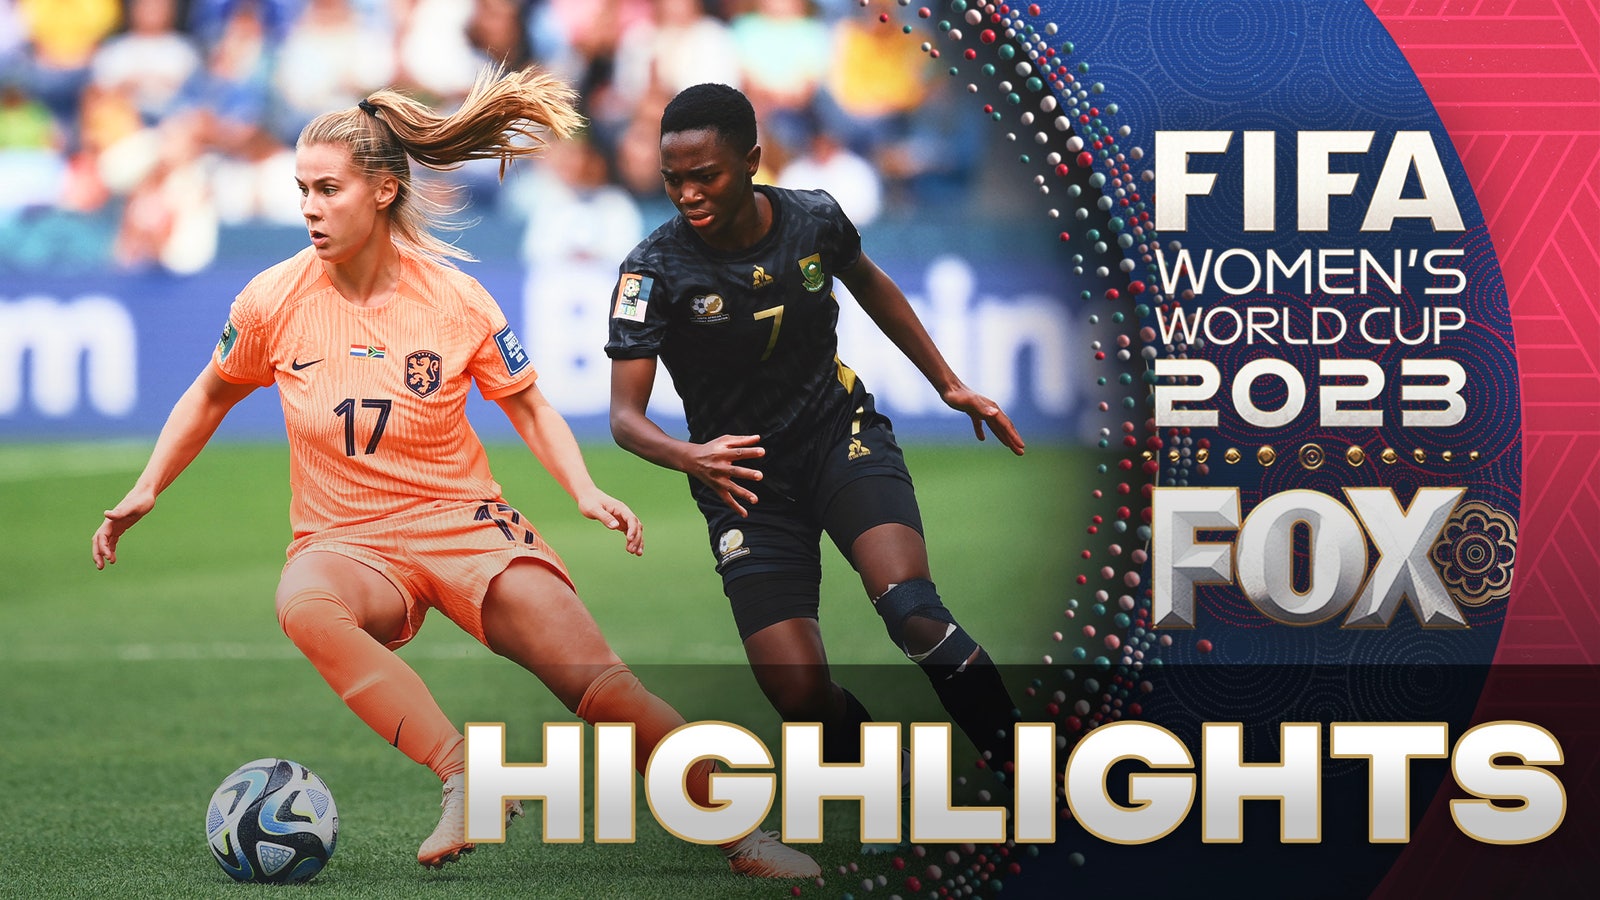 Highlights from the Netherlands' 2-0 win over South Africa